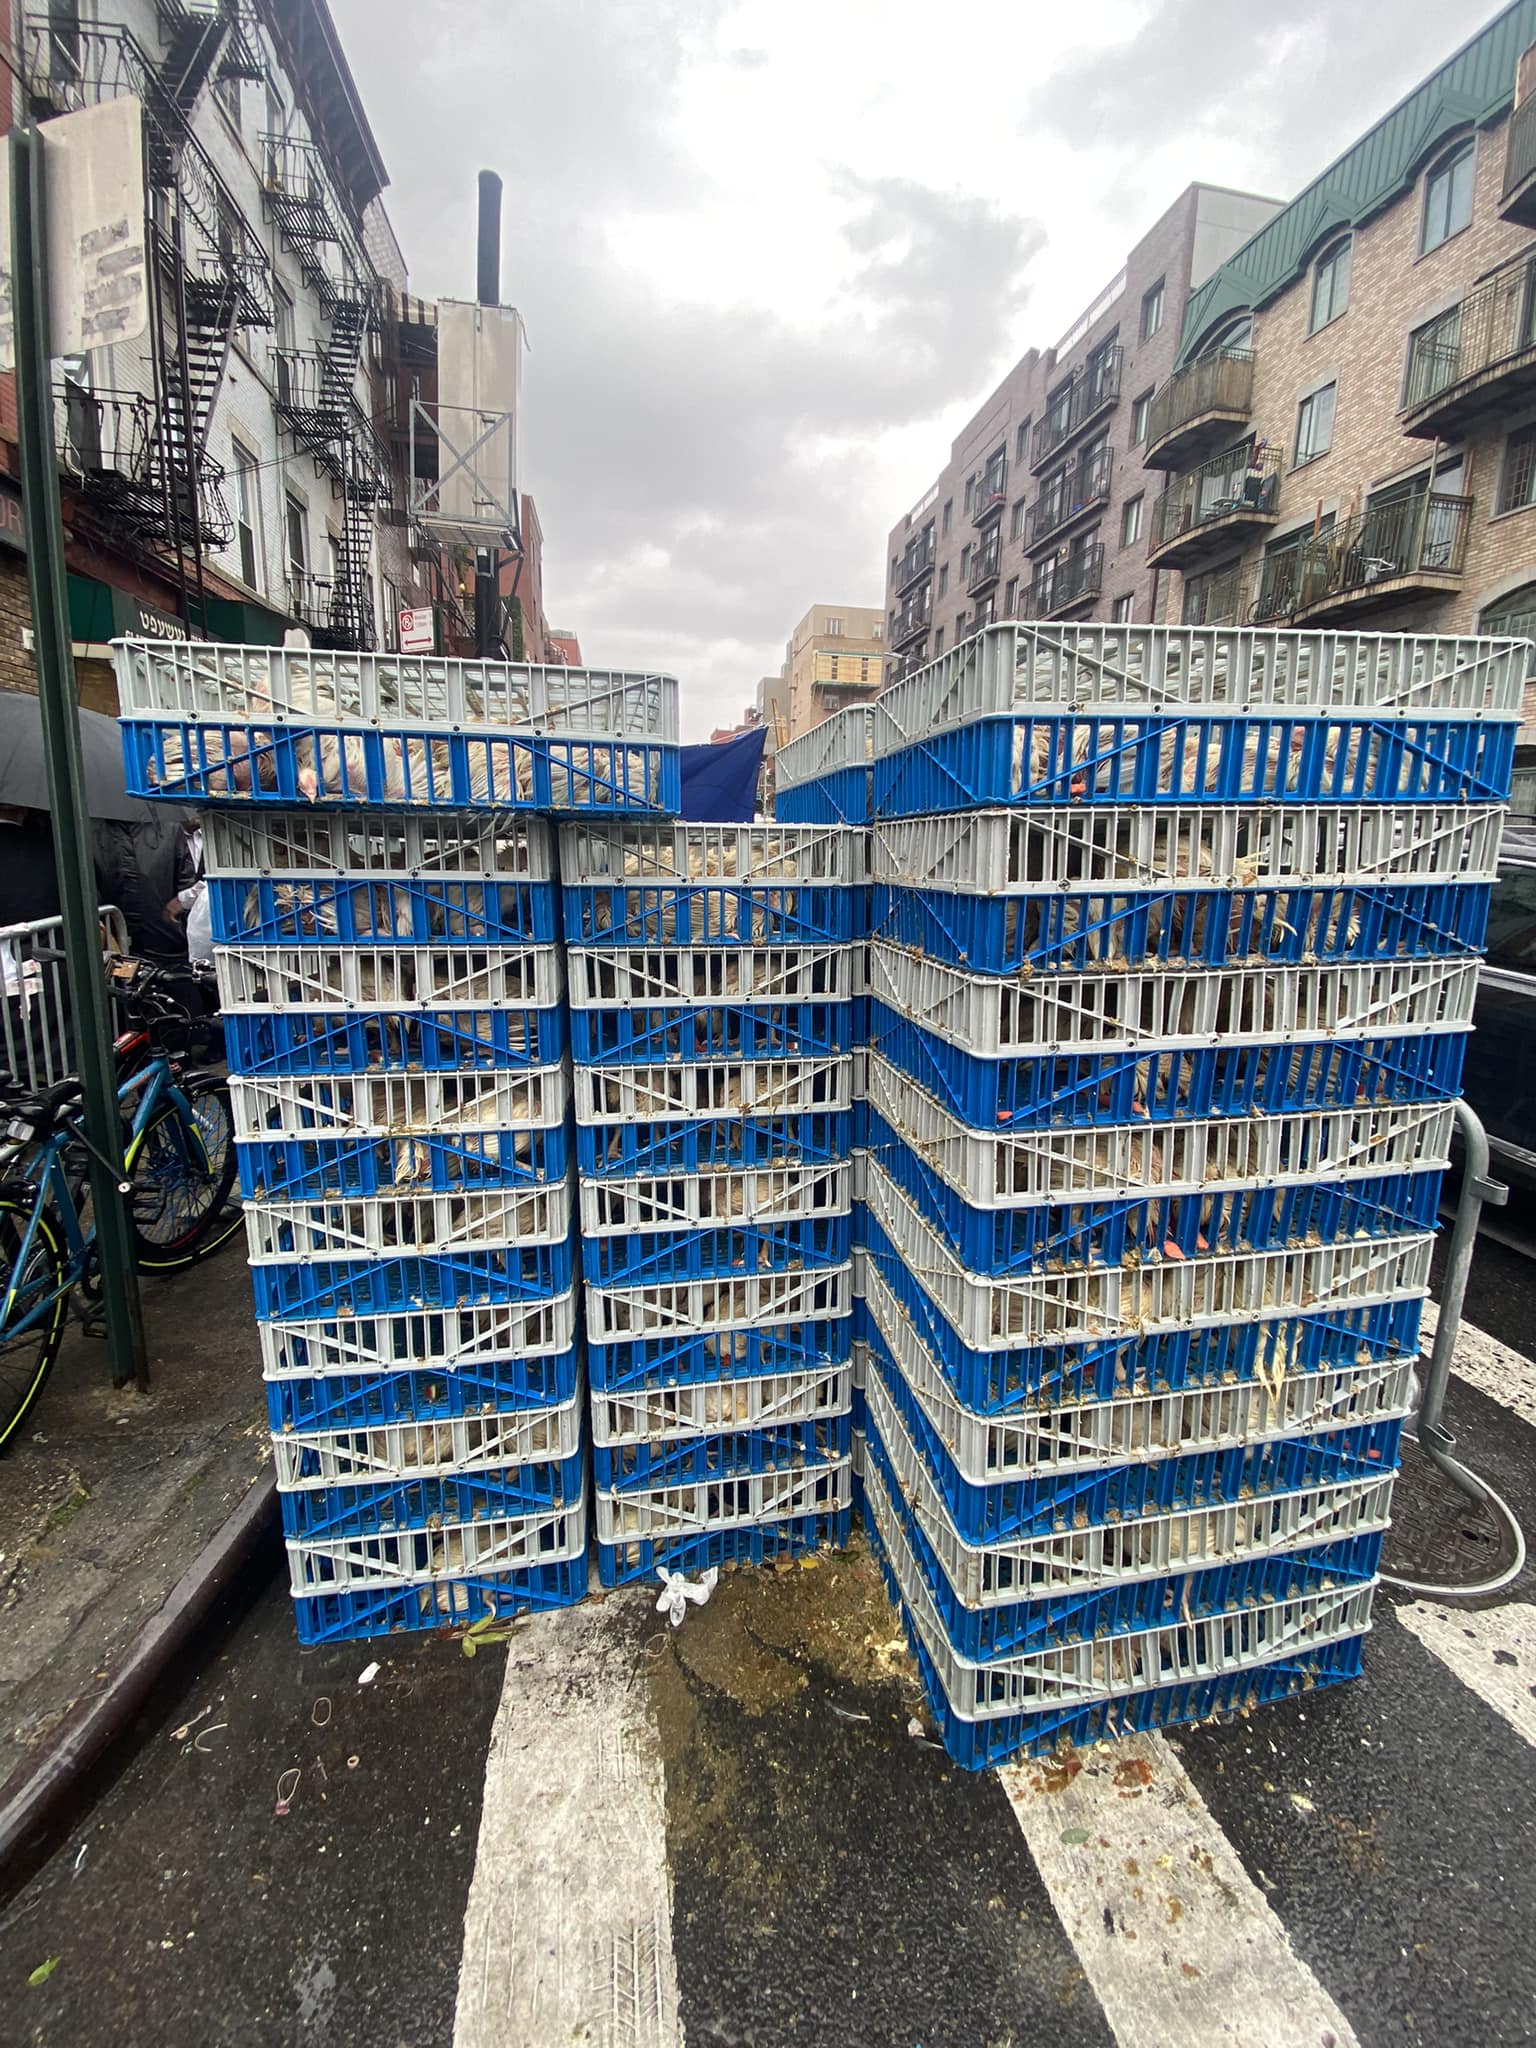 Crates filled with chickens cold and wet on the street